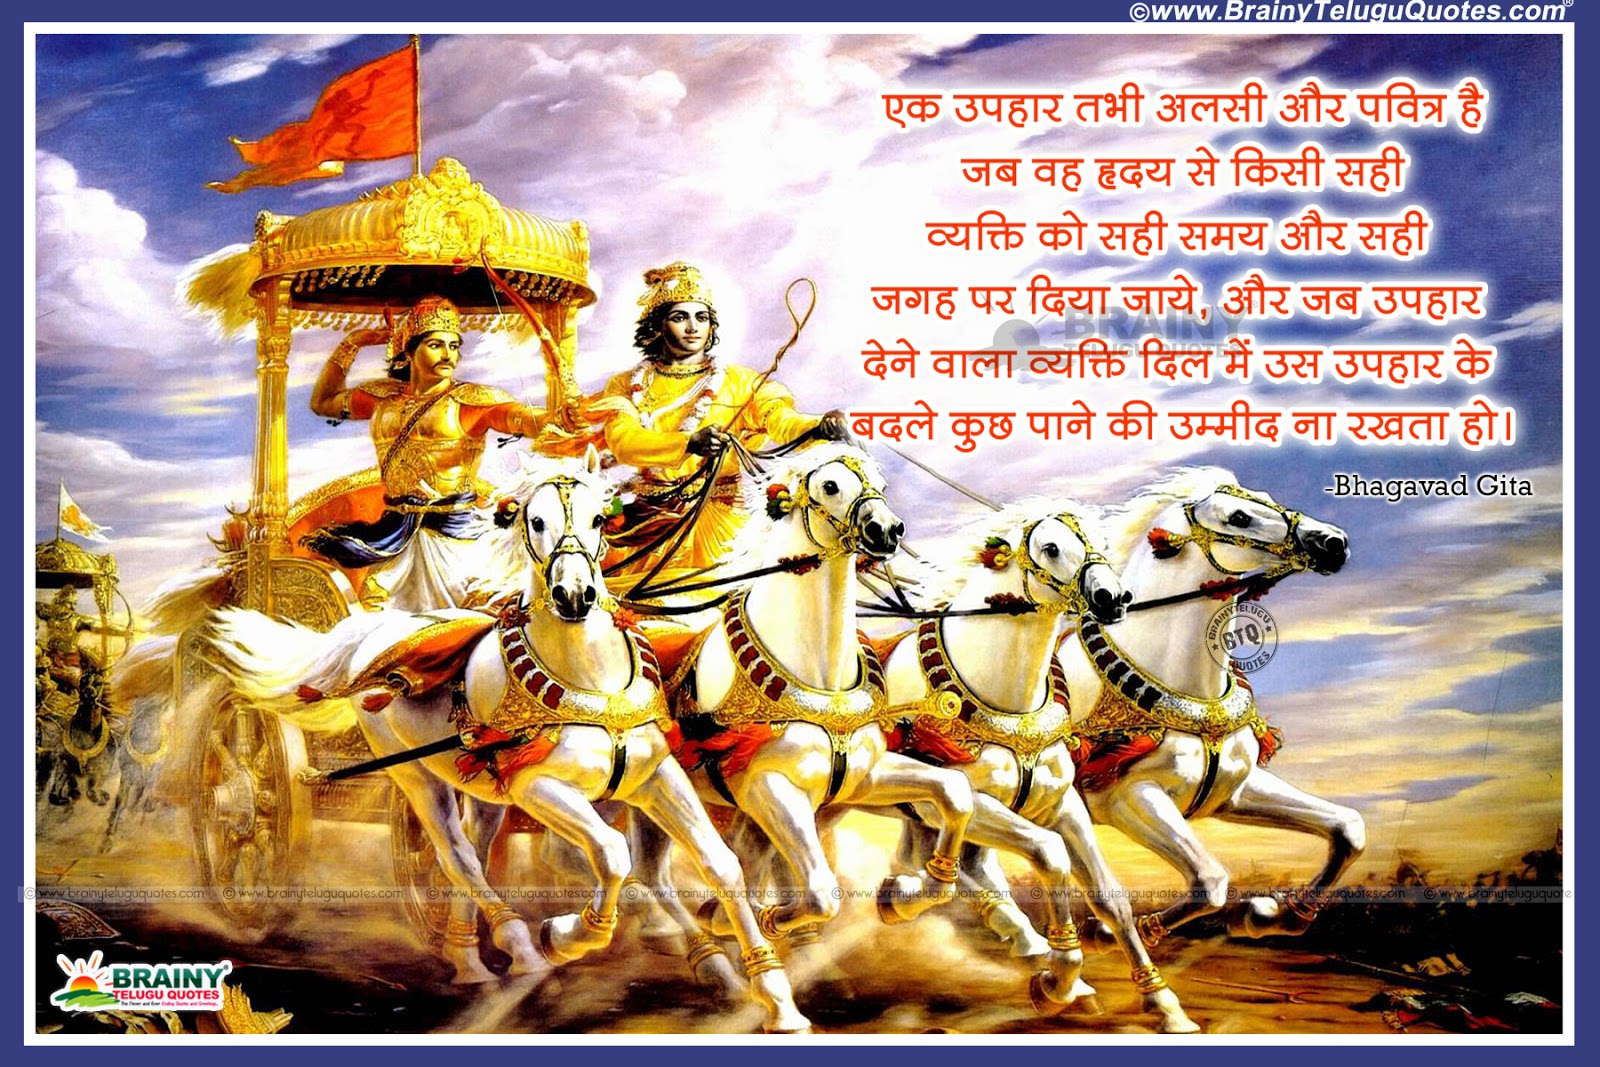 Best Bhagavad Gita Quotes and Sayings in Hindi with Wallpapers-Bhagavad